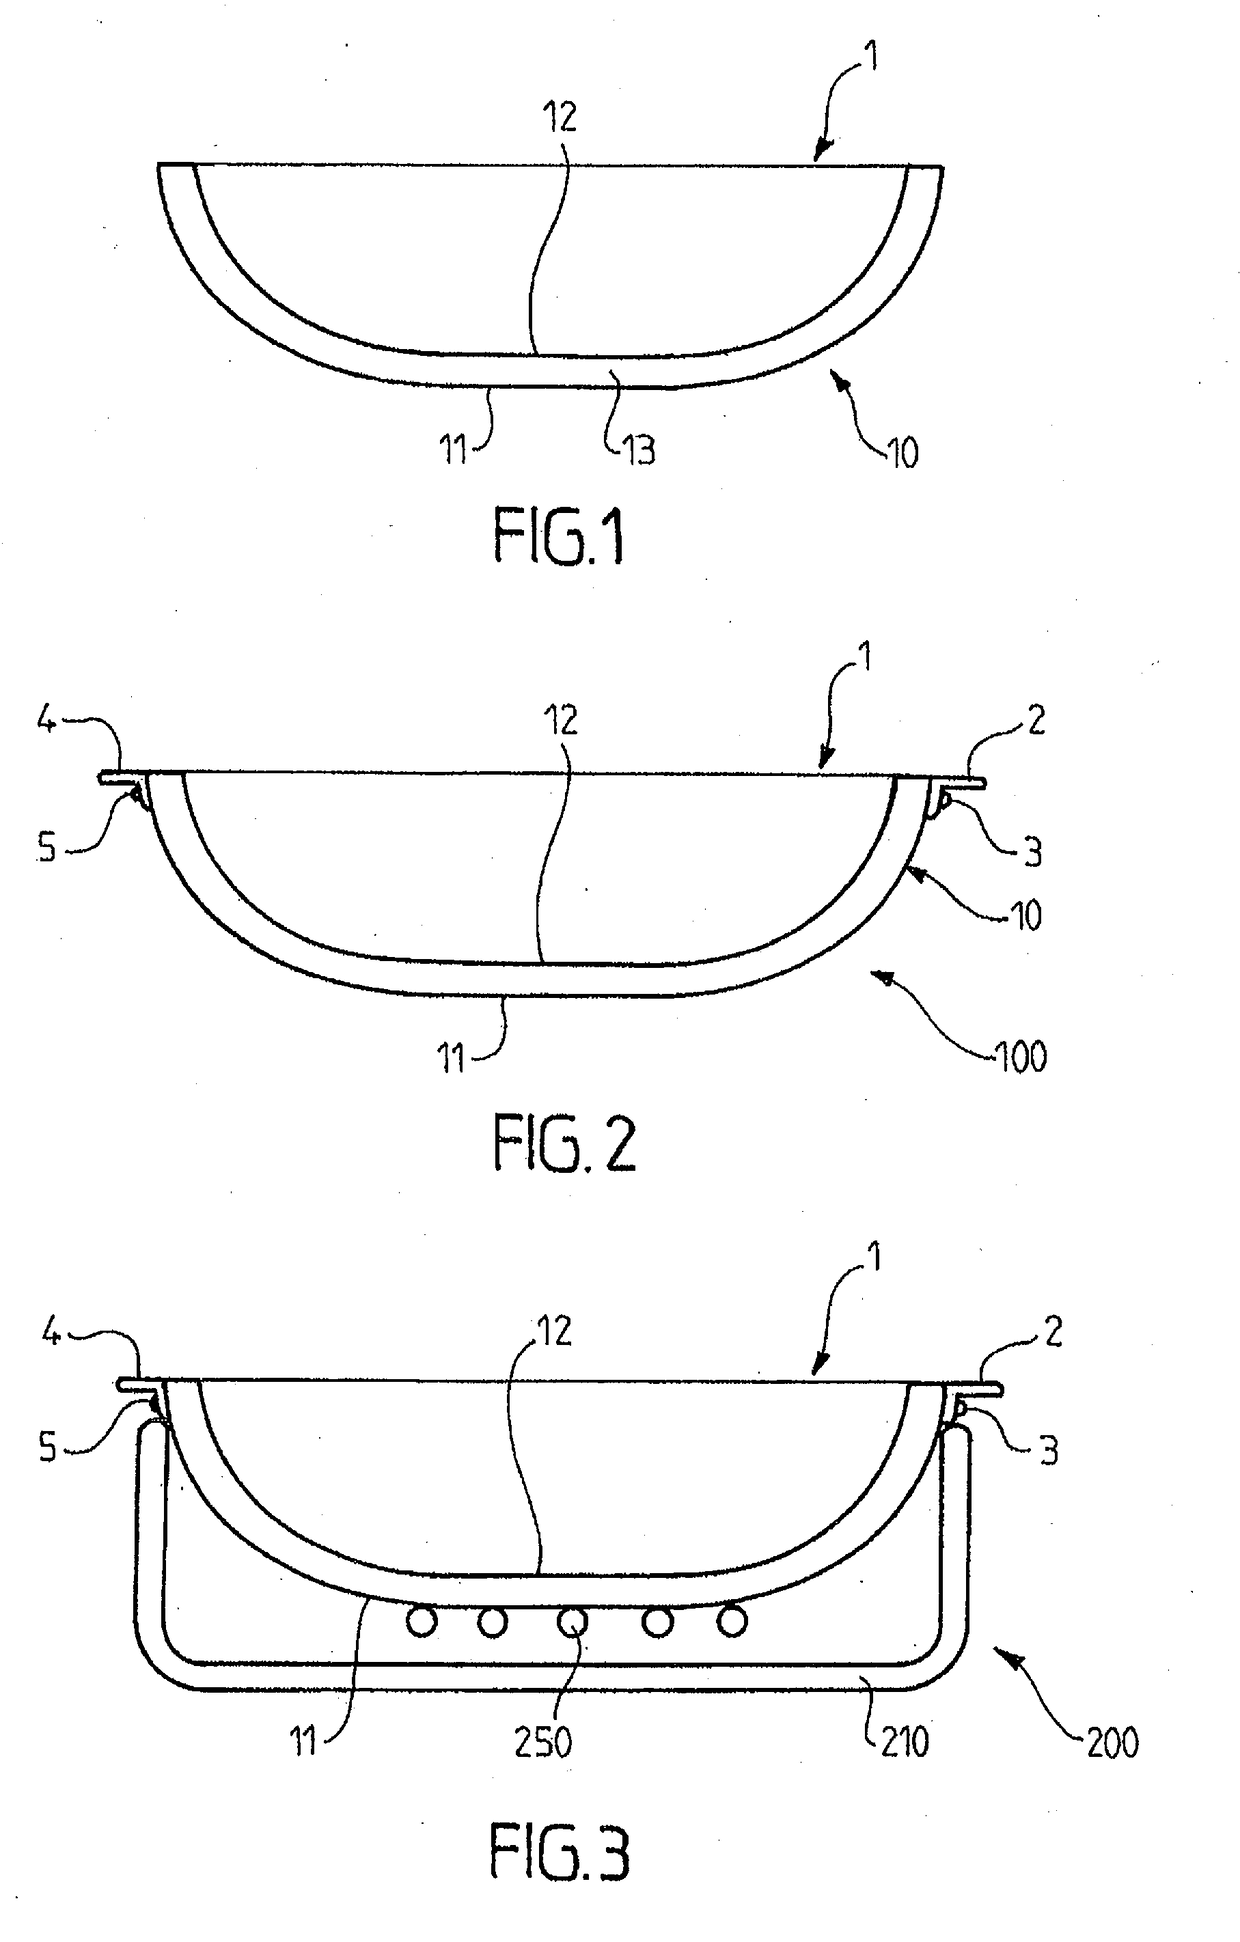 Method for Obtaining a Cooking Vessel Having a Colored, Hard, Anodized Outer Surface